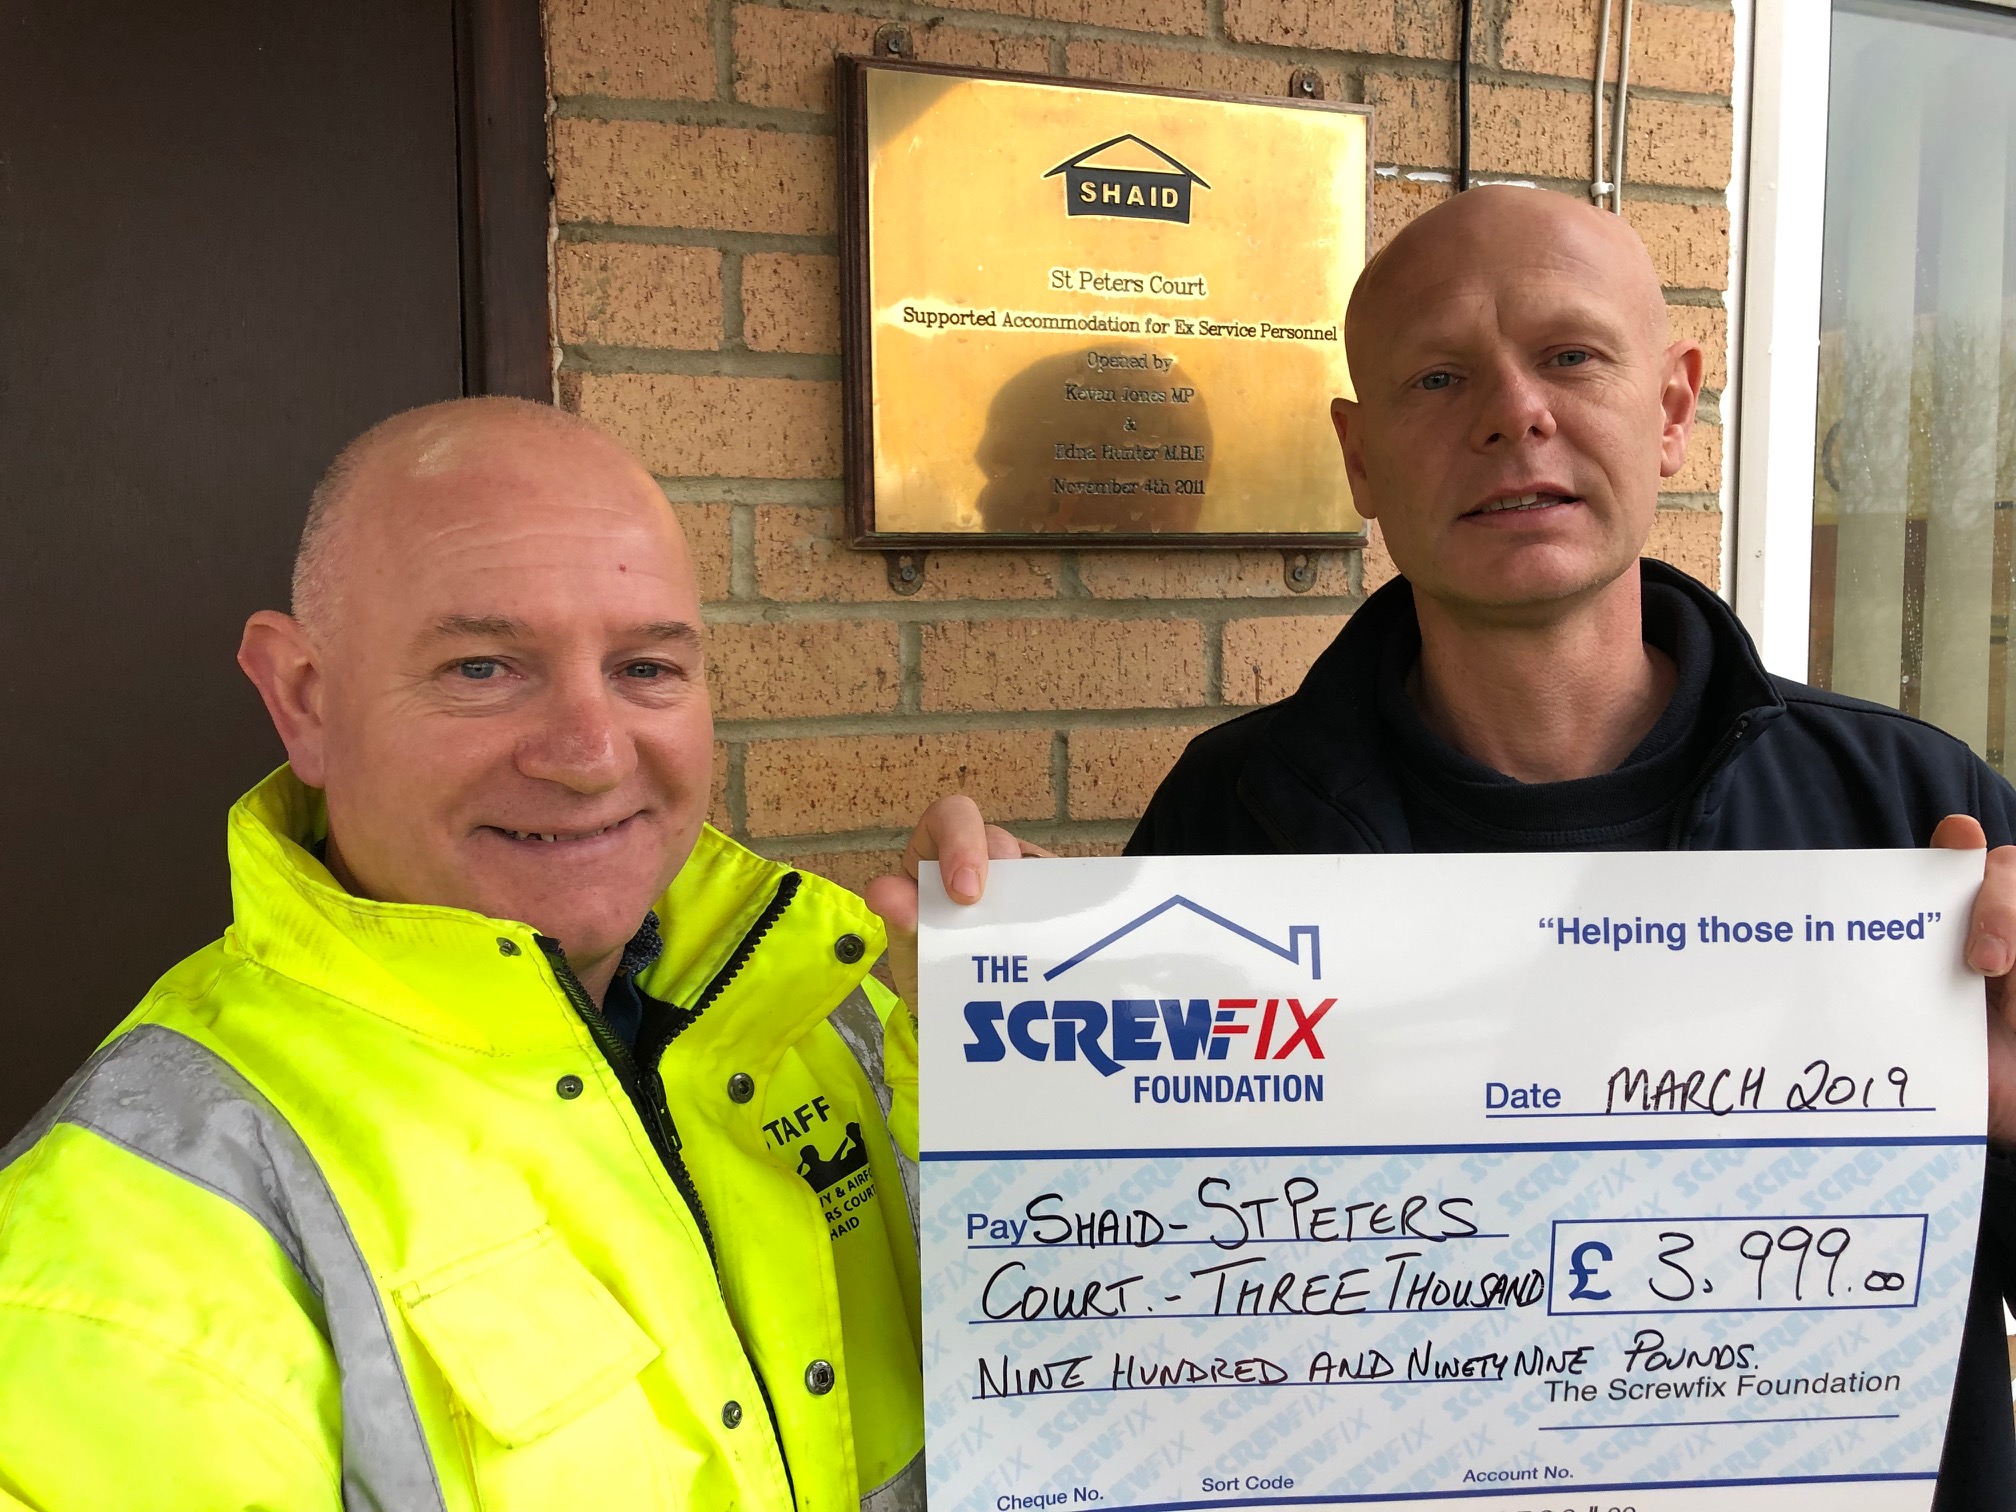 Shaid/St Peters Court charity gets a helping hand from the Screwfix Foundation